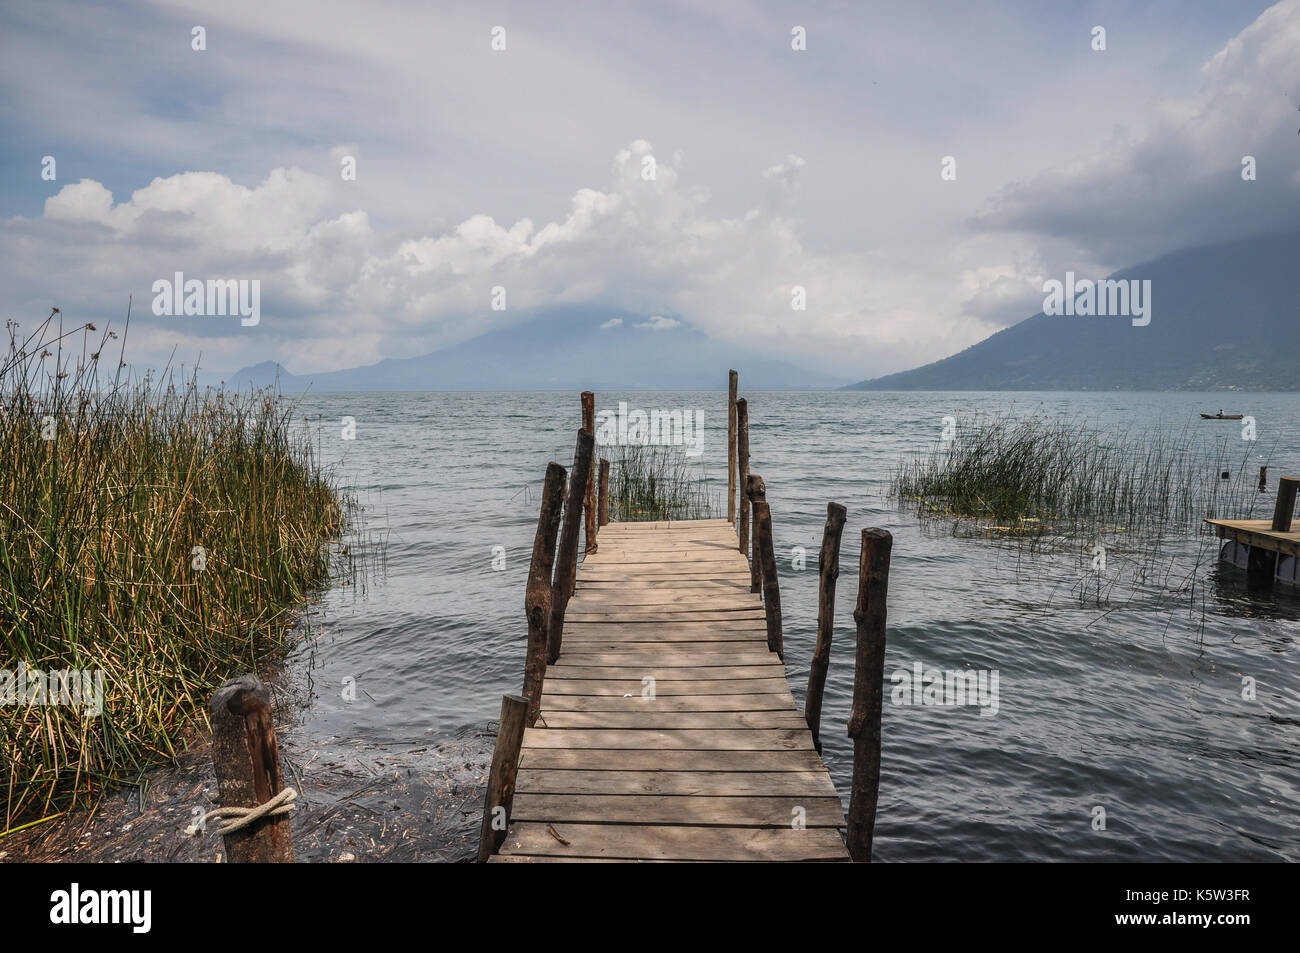 A wooden pier extends into a calm lake surrounded by mountains and under a cloudy sky. Stock Photo